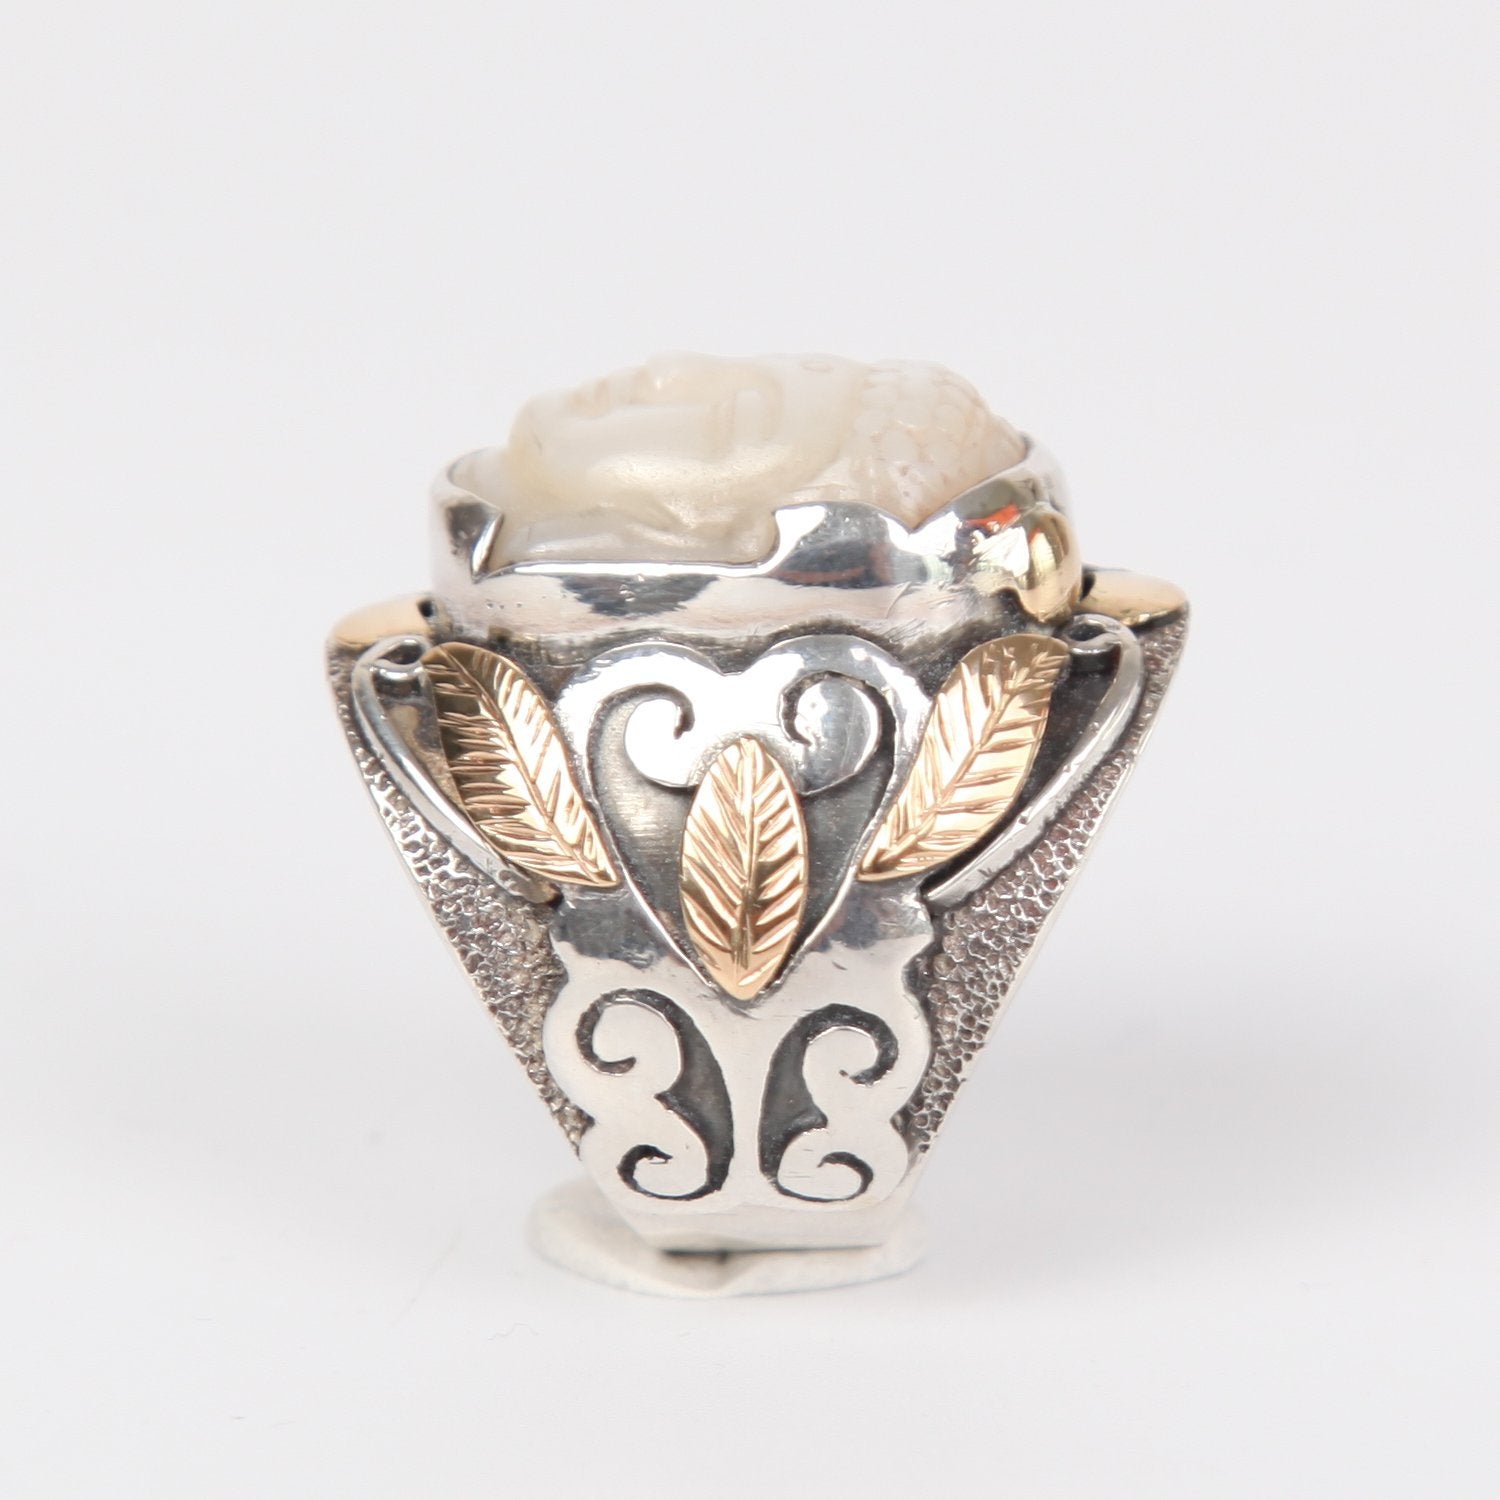 Mother of Pearl Buddha Head Ring with Sterling Silver and 18k Gold